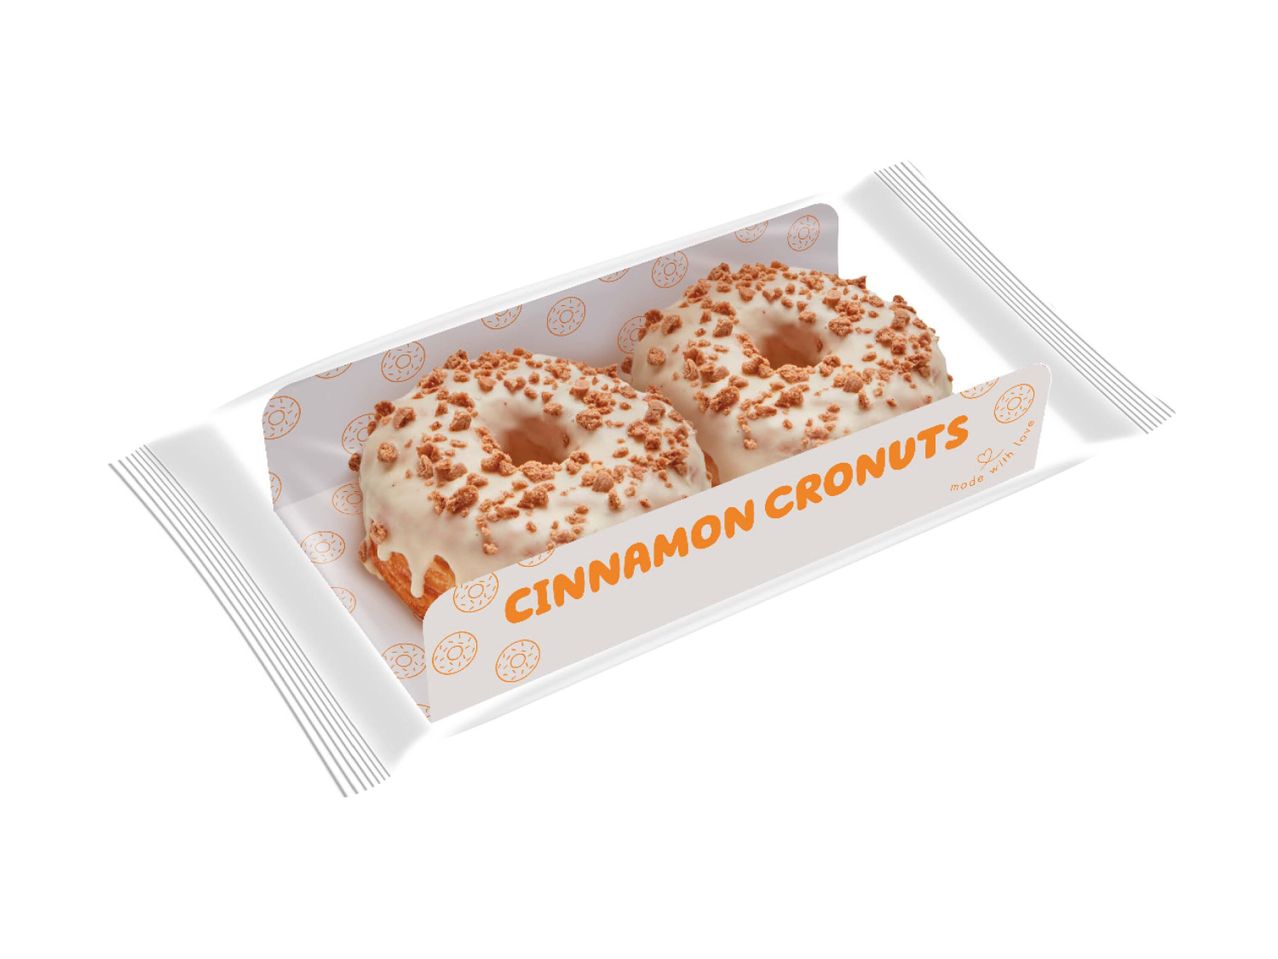 Go to full screen view: Cinnamon Donuts - Image 1